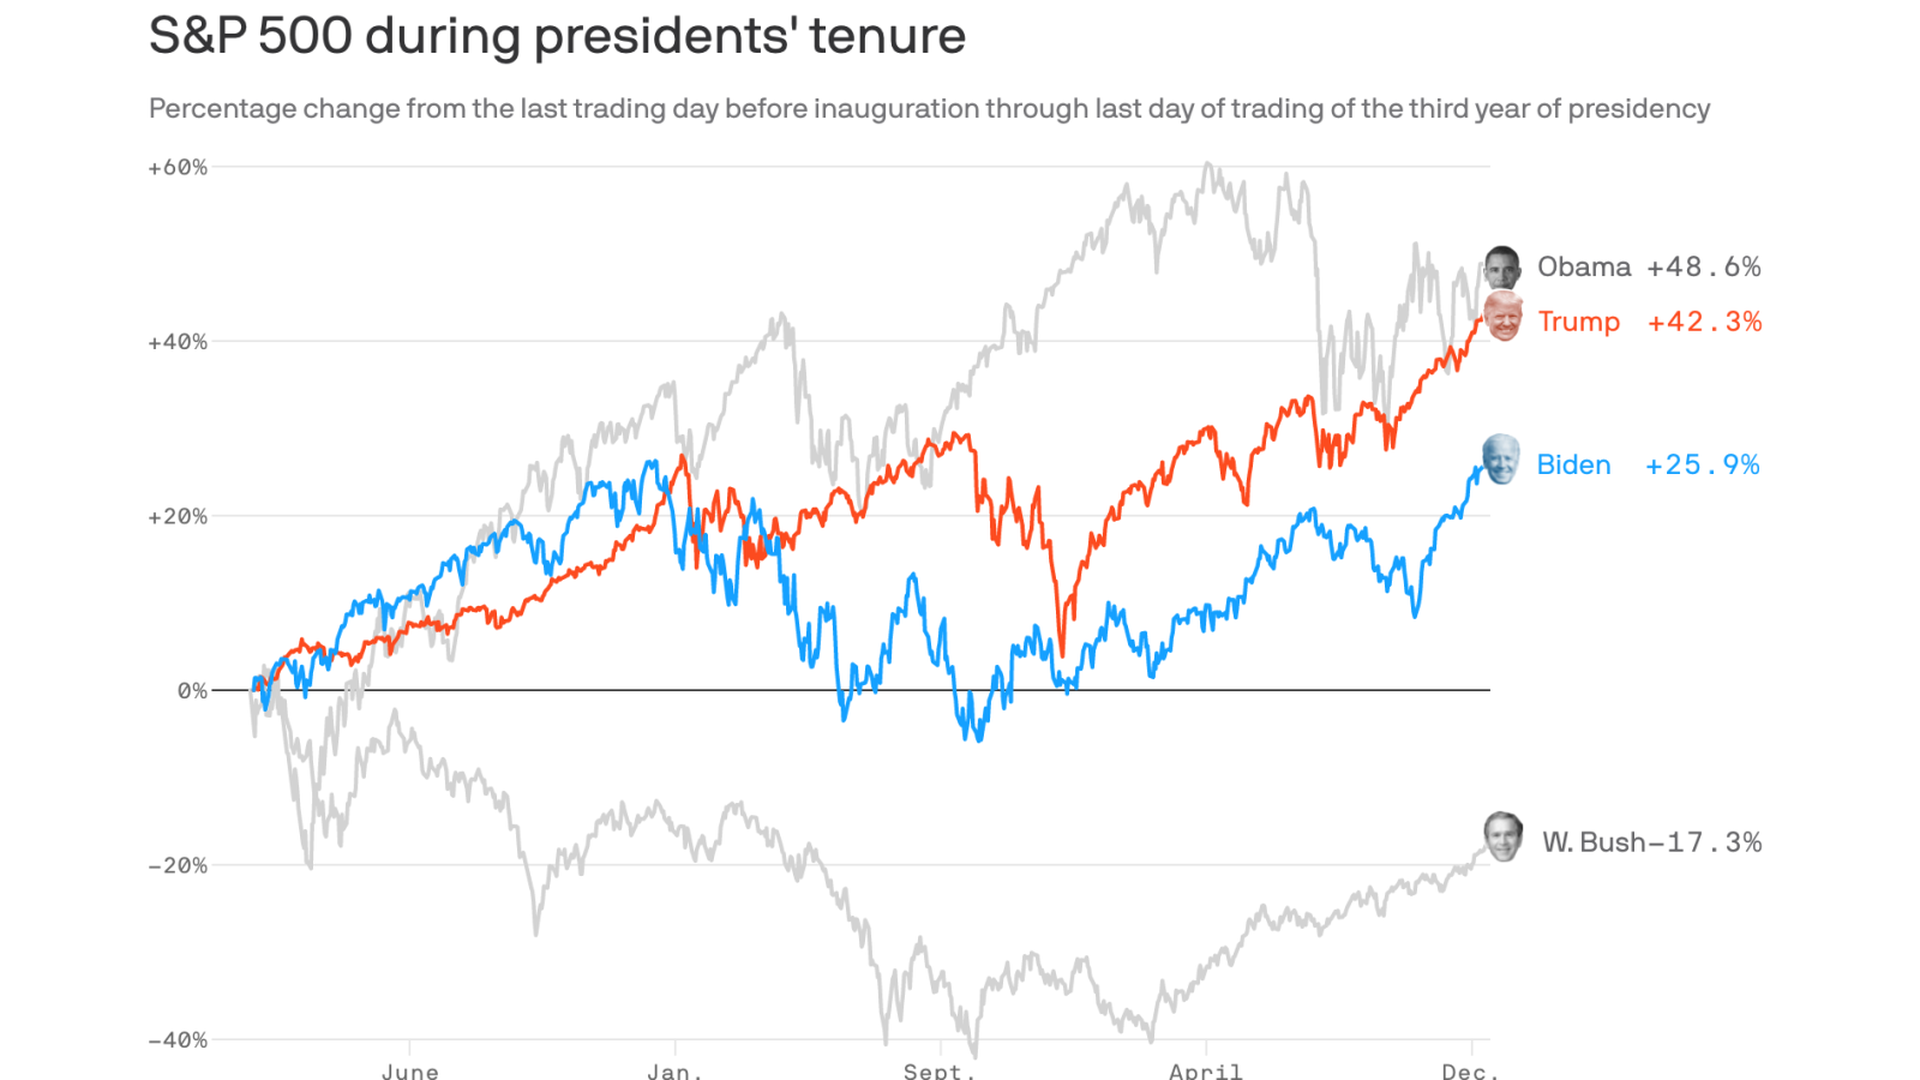 A line chart showing the S&P 500 during presidents' tenure from the last trading day before inauguration through last day of trading of the third year of presidency.